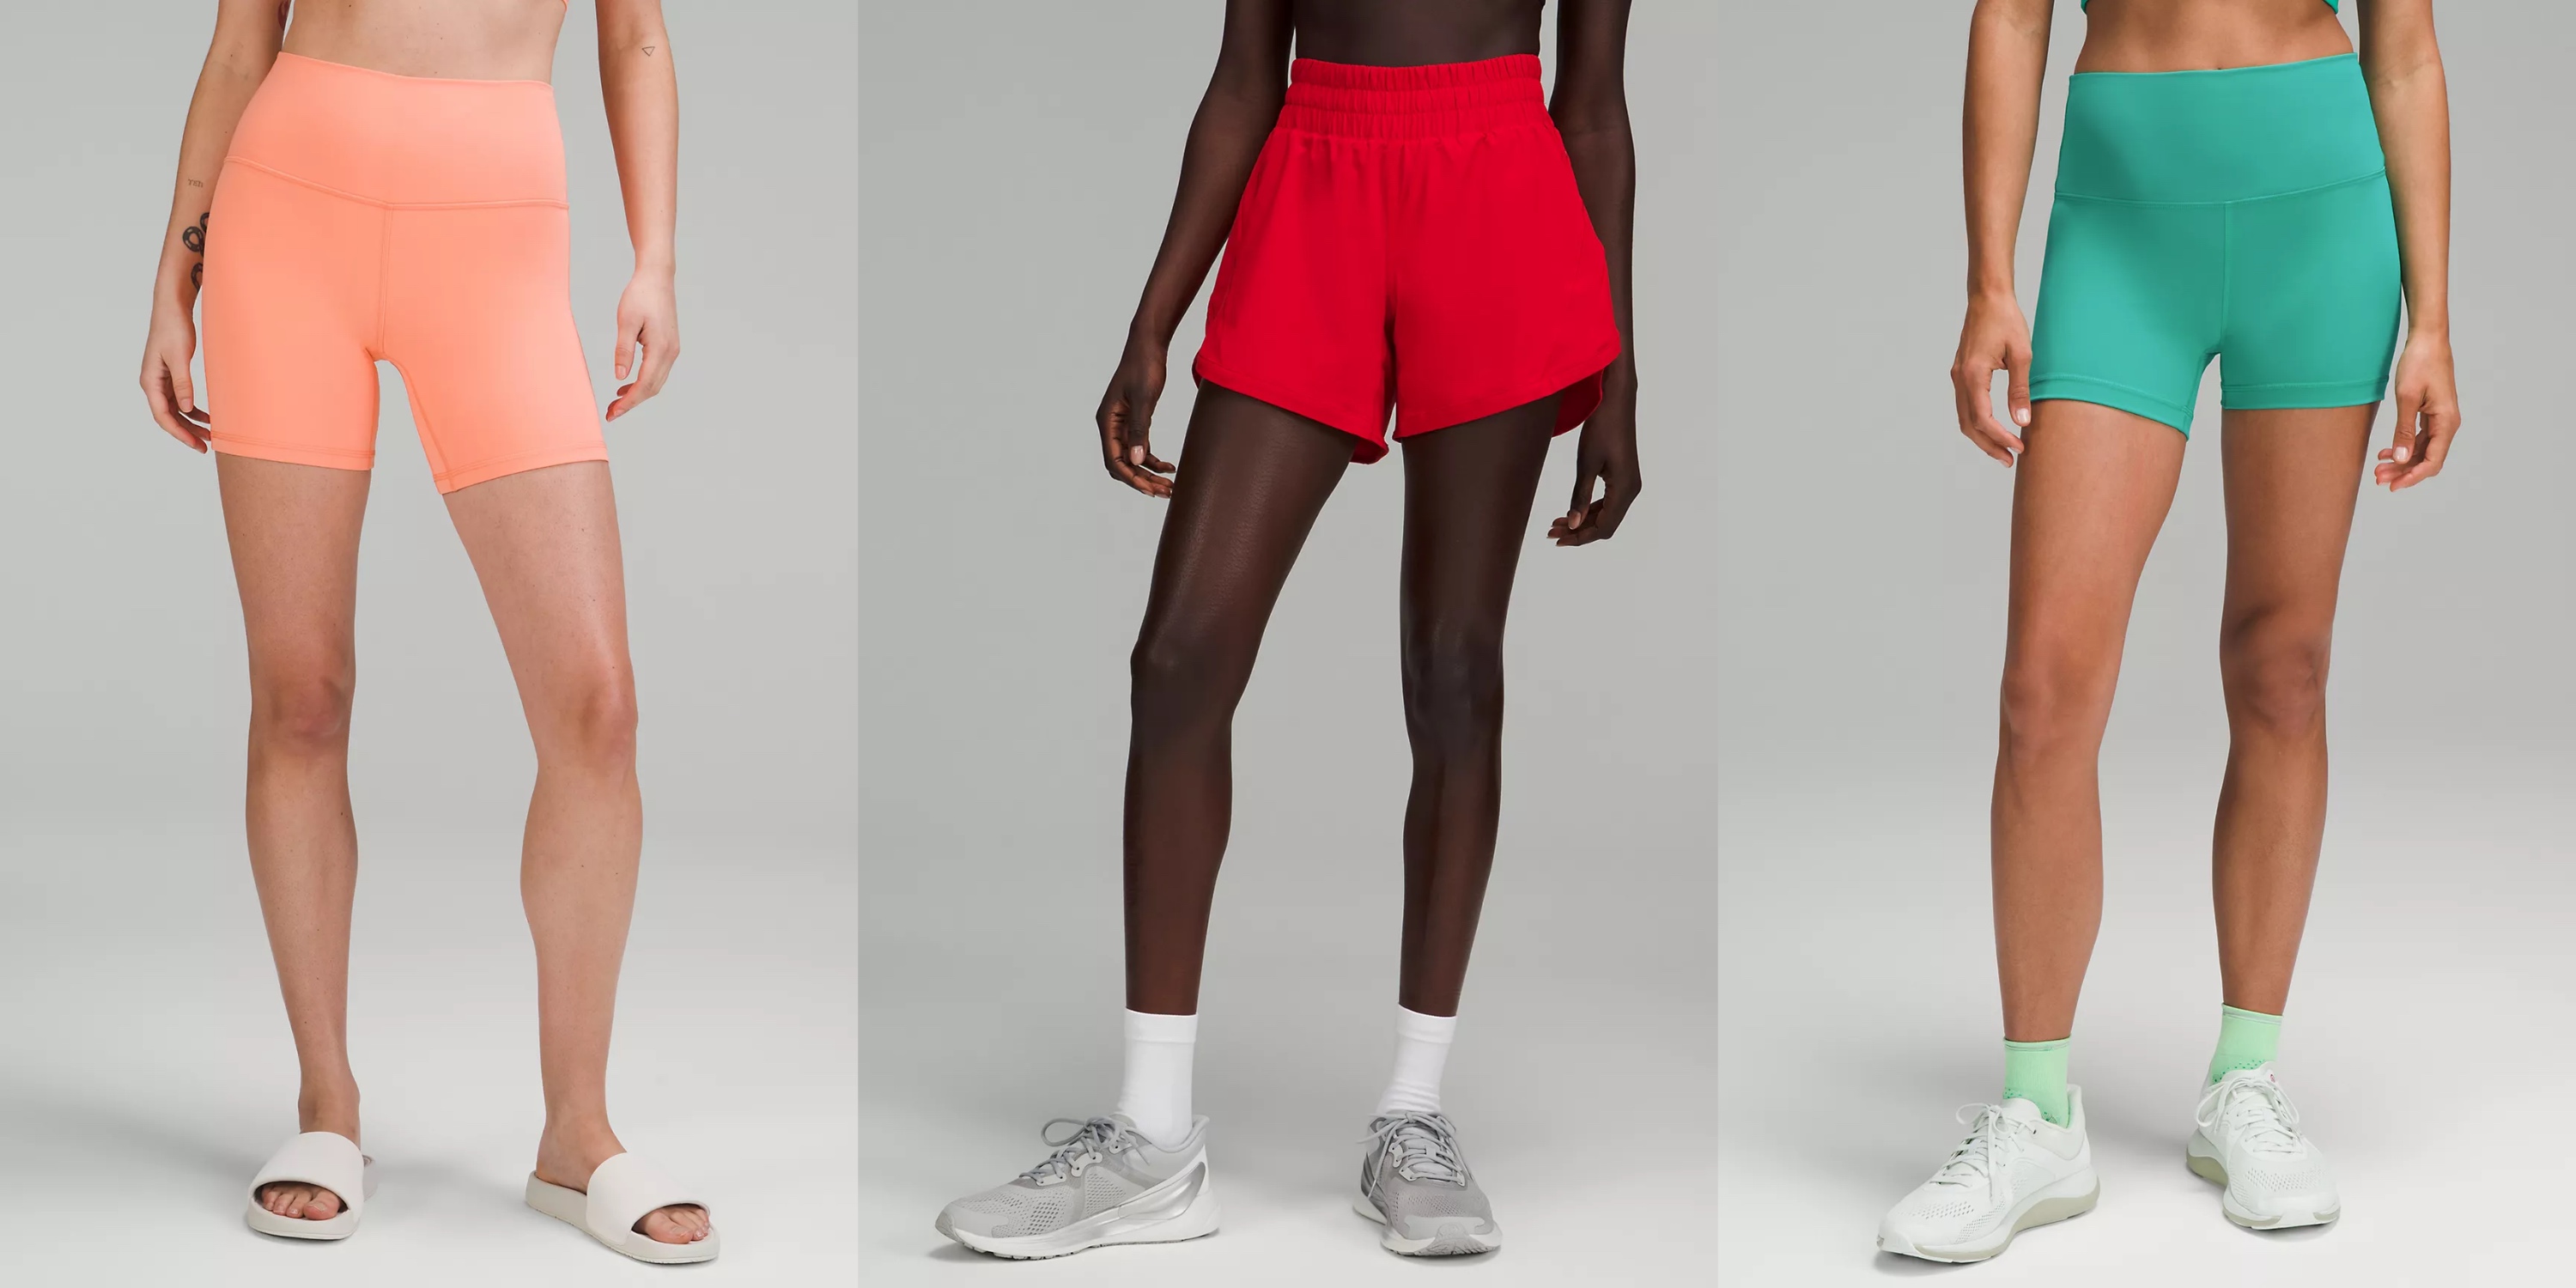 We Made Too Much Sale: Best deals on Lululemon shorts this week (7/13/23) 